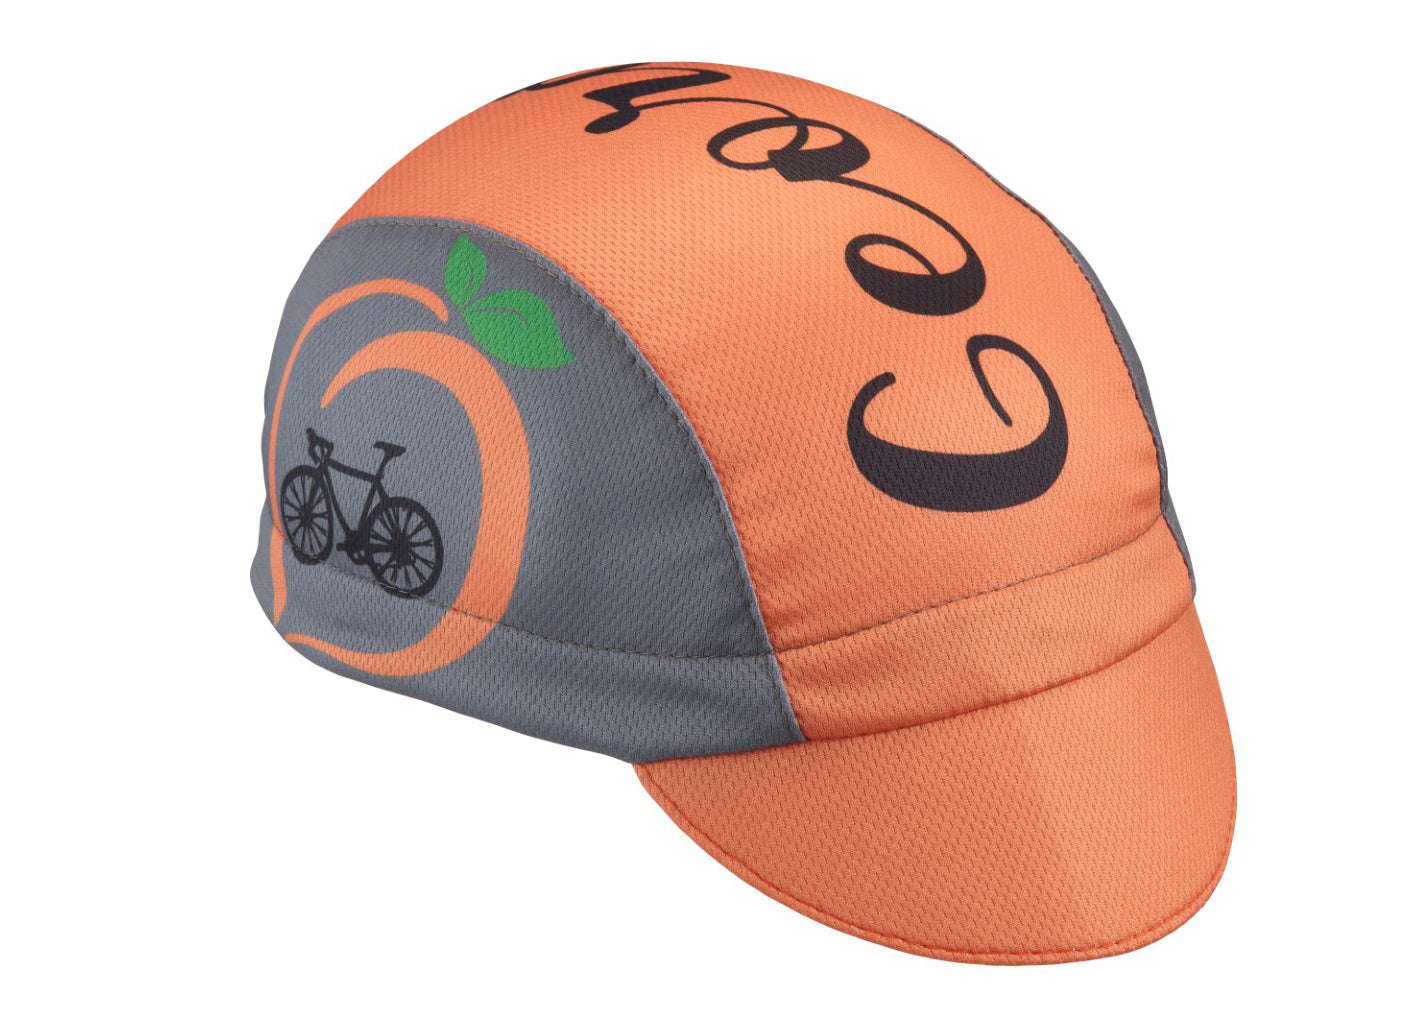 Georgia Technical 3-Panel Cycling Cap. Orange and gray cap with Georgia text on top and peach and bike icons on the side.  Angled view.